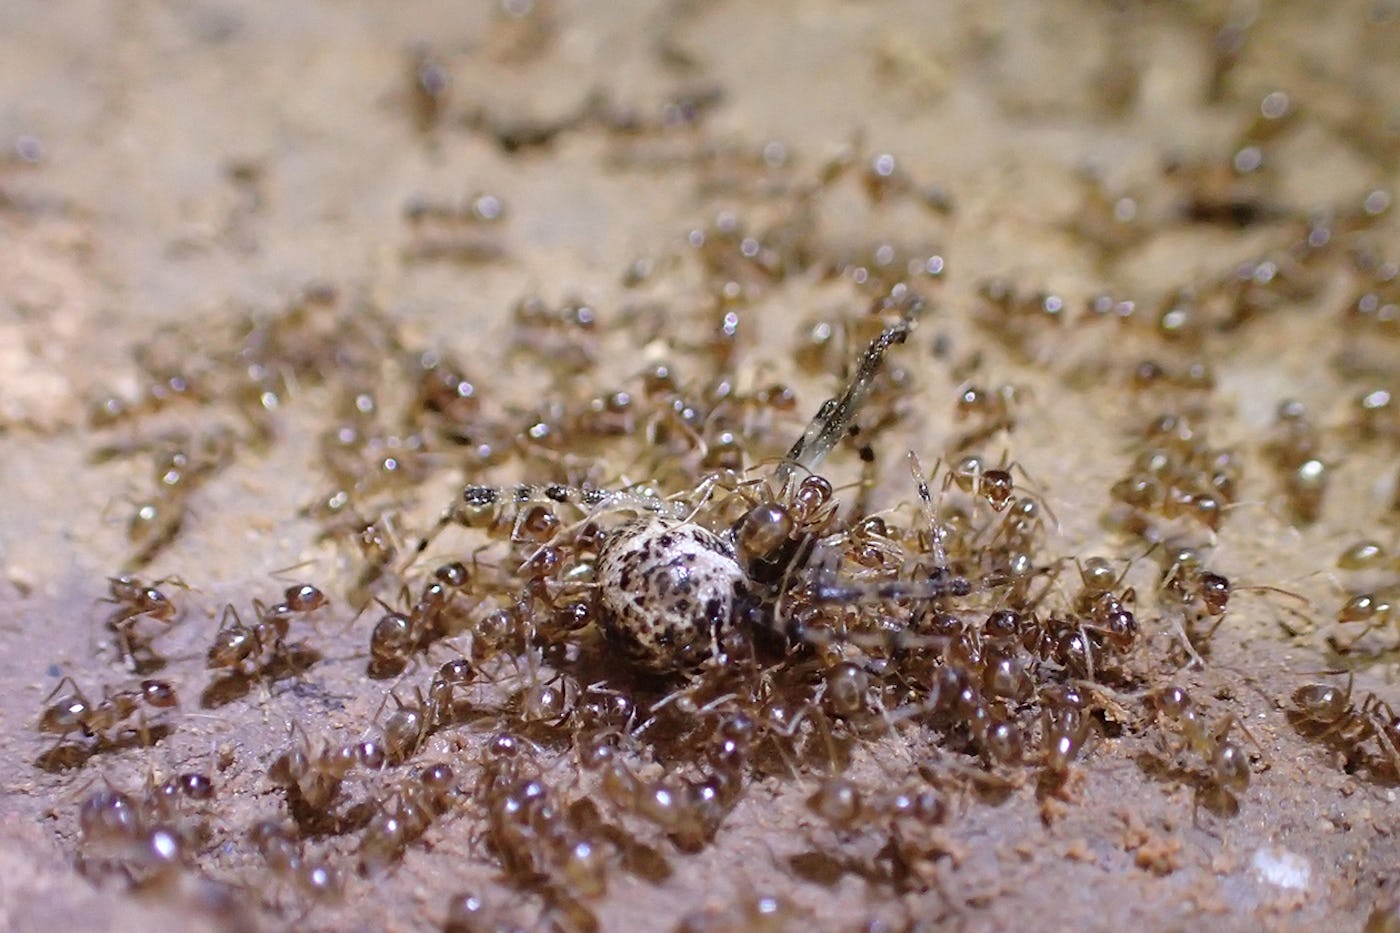 Ants swarm on a larger, dead insect